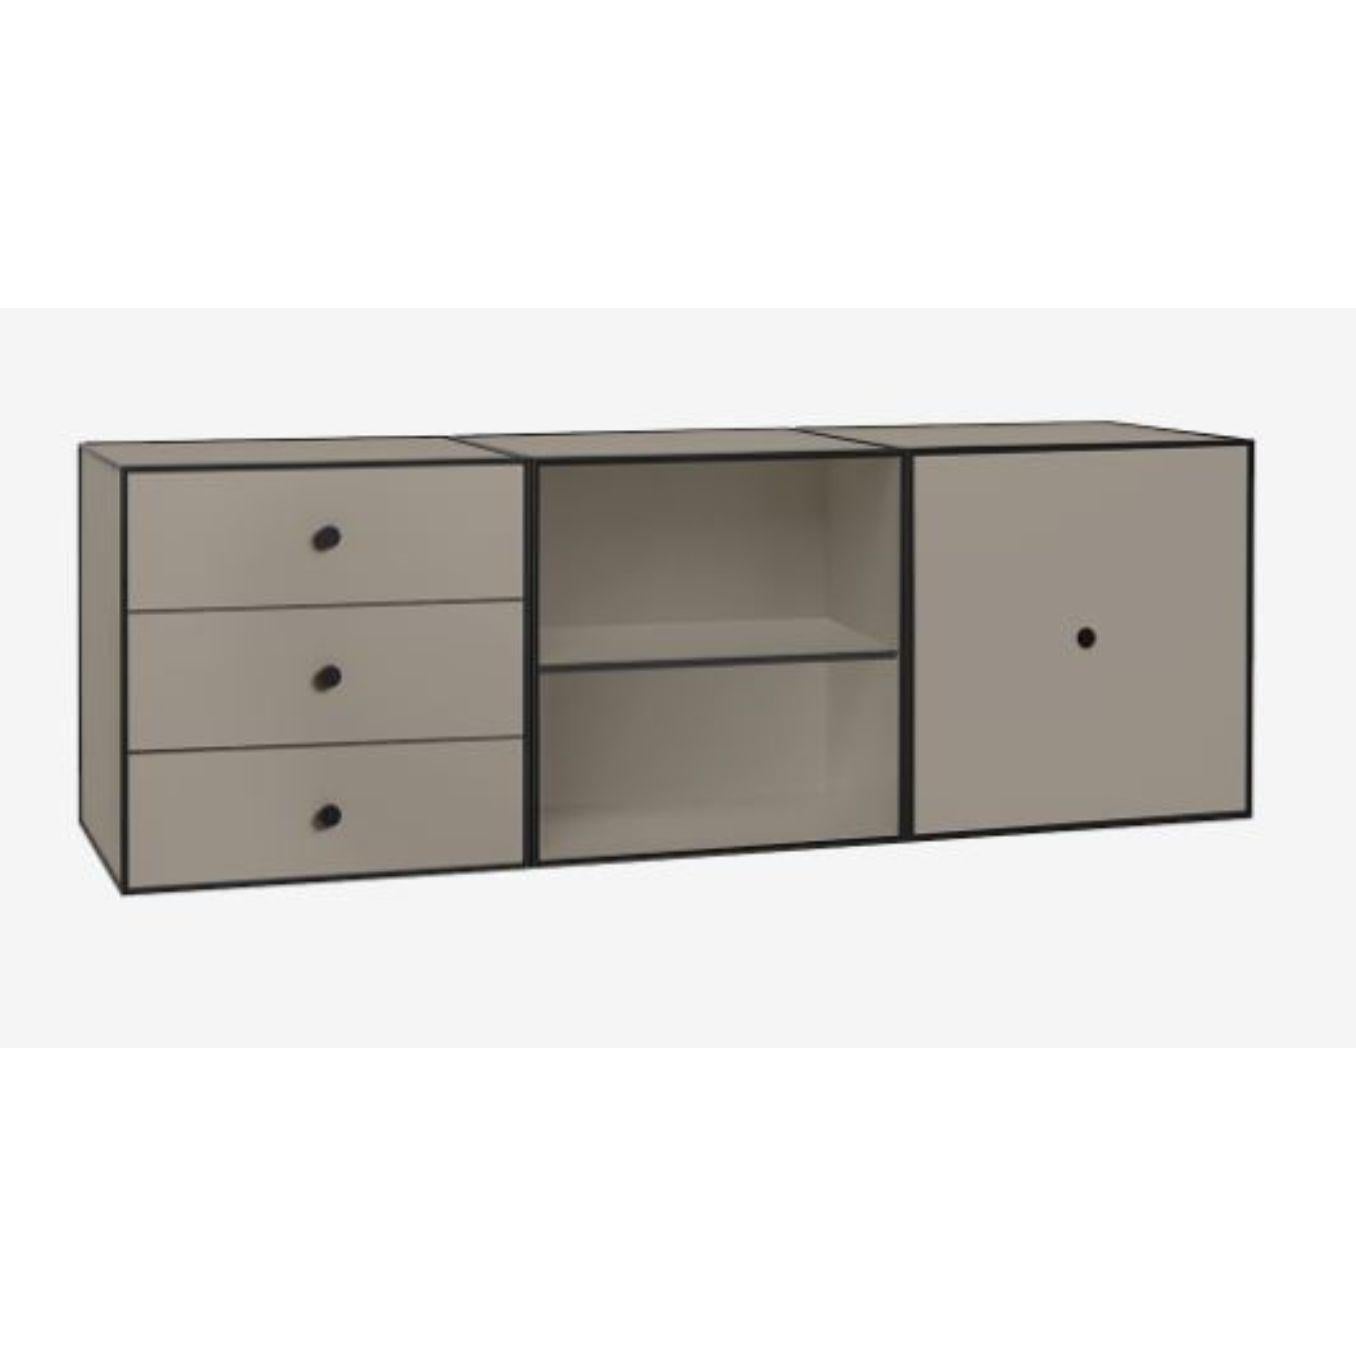 49 Sand frame box trio by Lassen
Dimensions: D 147 x W 42 x H 49 cm 
Materials: finér, melamin, melamine, metal, veneer
Also available in different colours and dimensions.
Weight: 45 Kg

By Lassen is a Danish design brand focused on iconic